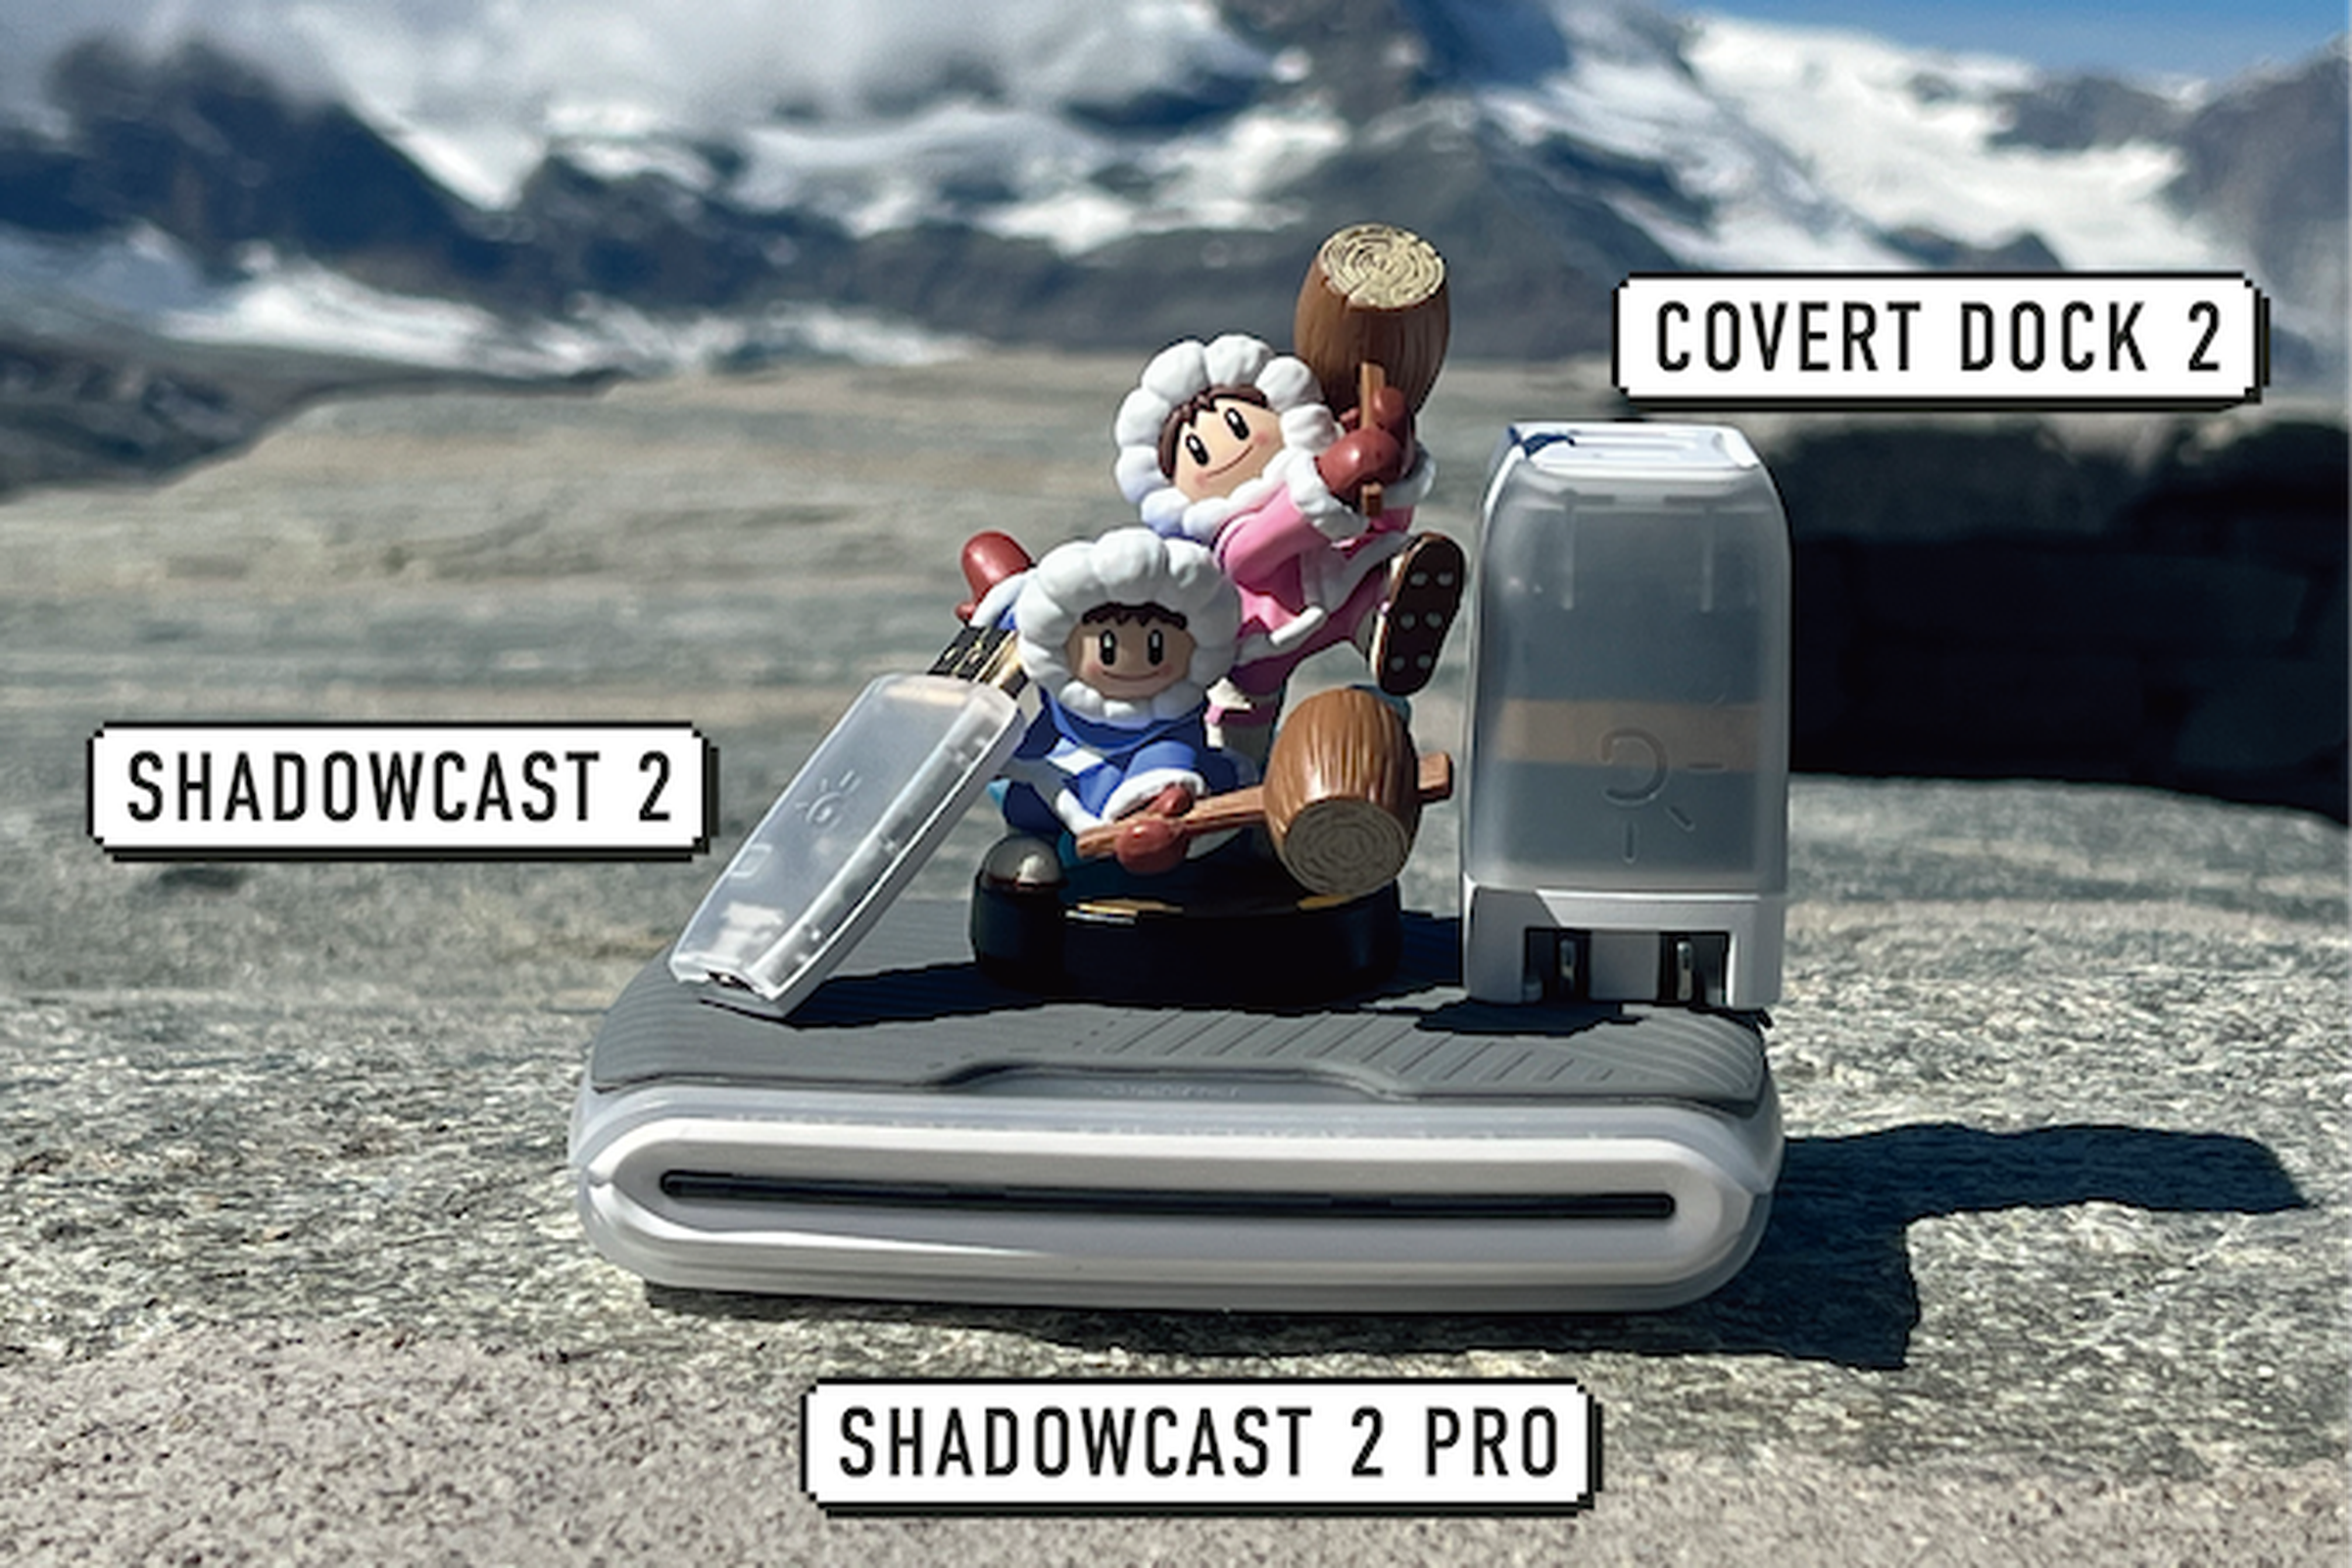 Ice climber amiibo with ShadowCast 2 dongle and Covert Dock 2 power adapter in translucent plastic, plus the ShadowCast 2 pro slab.